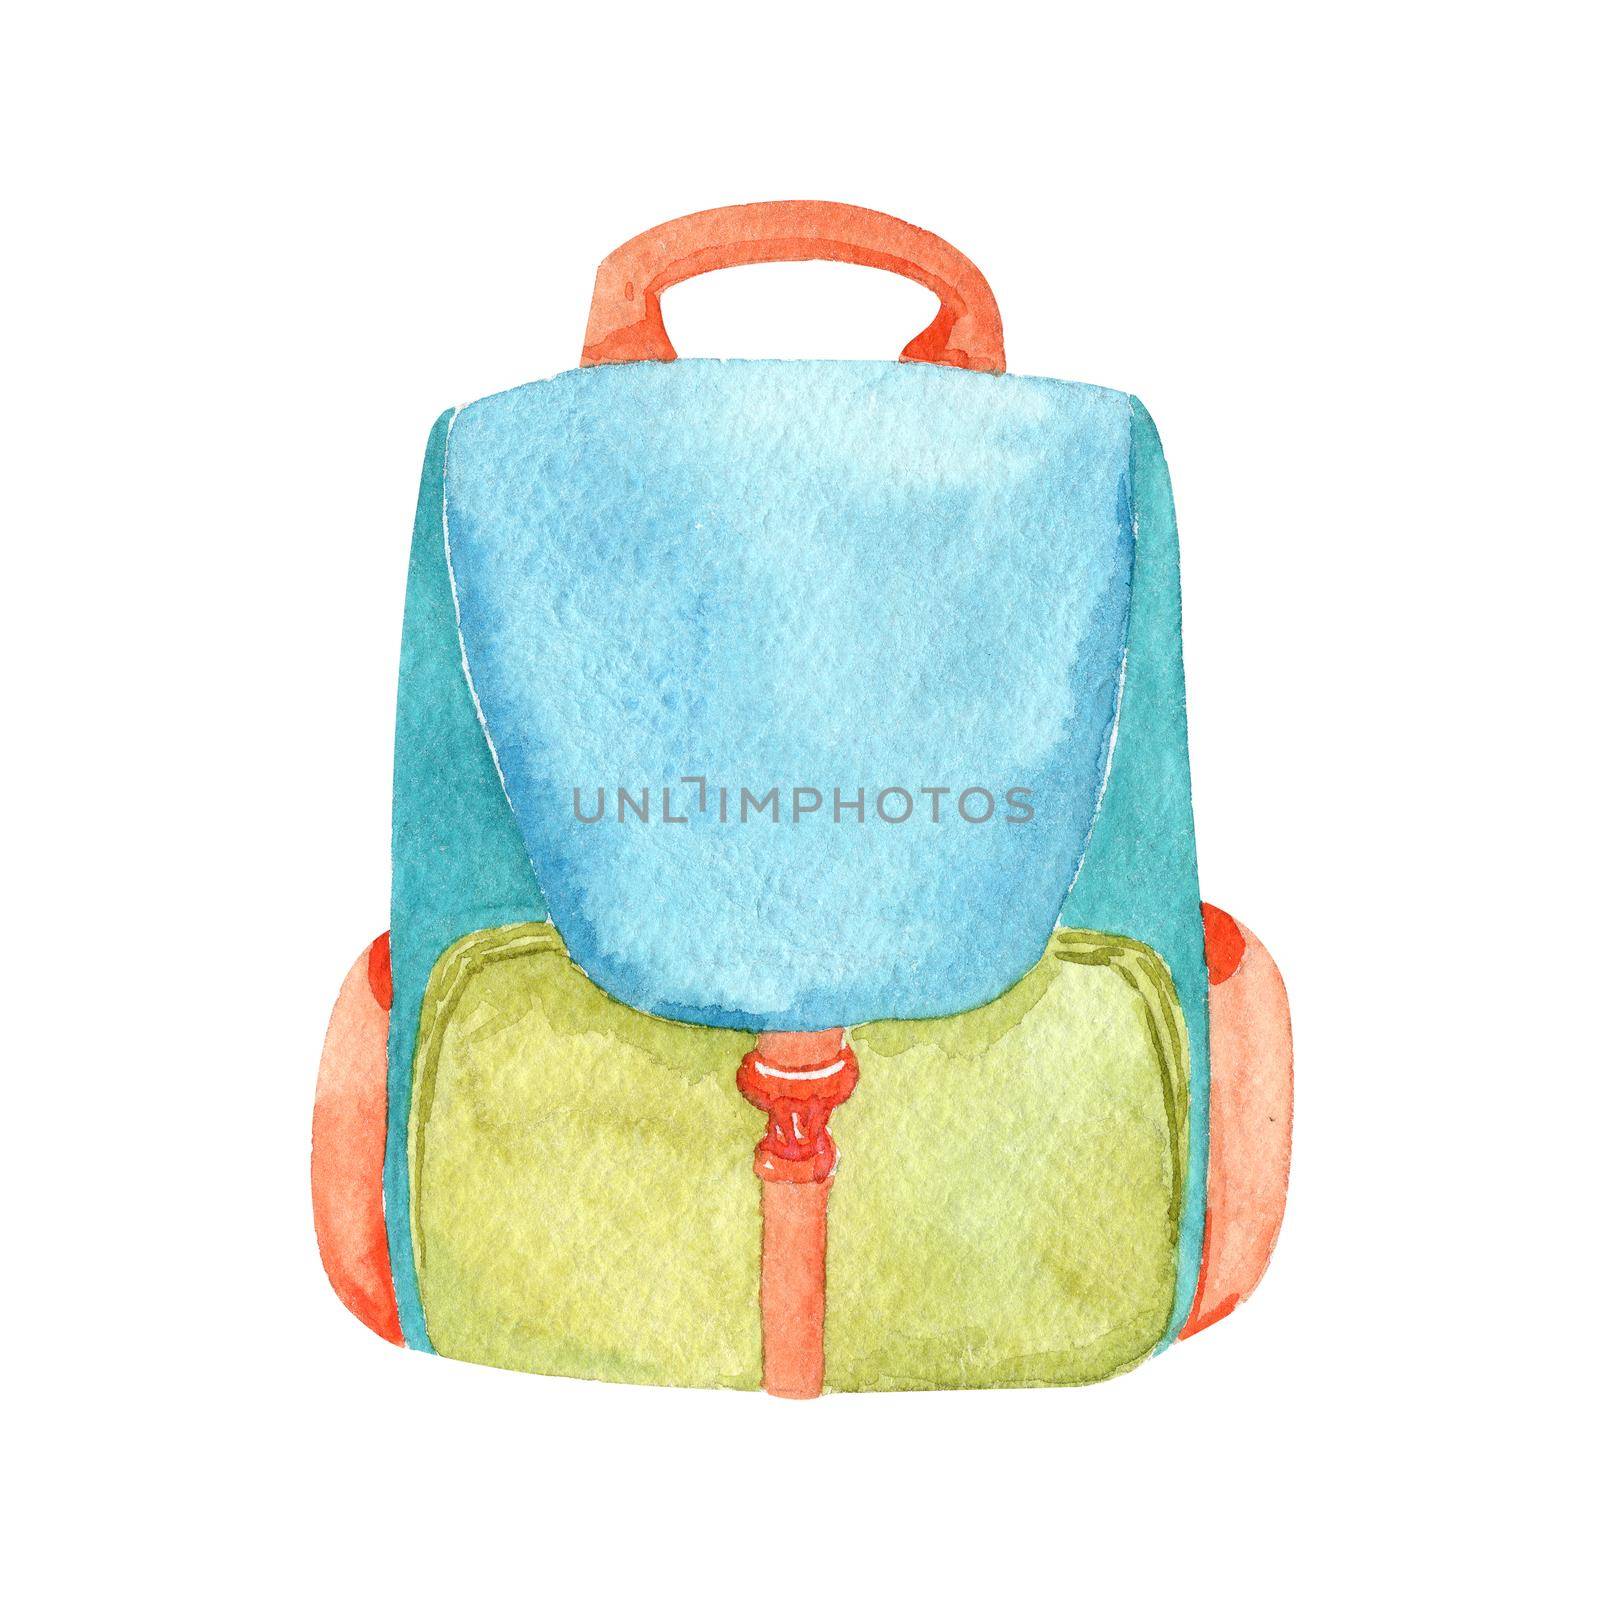 watercolor blue backpack isolated on white background. School bag. Travel bag by dreamloud